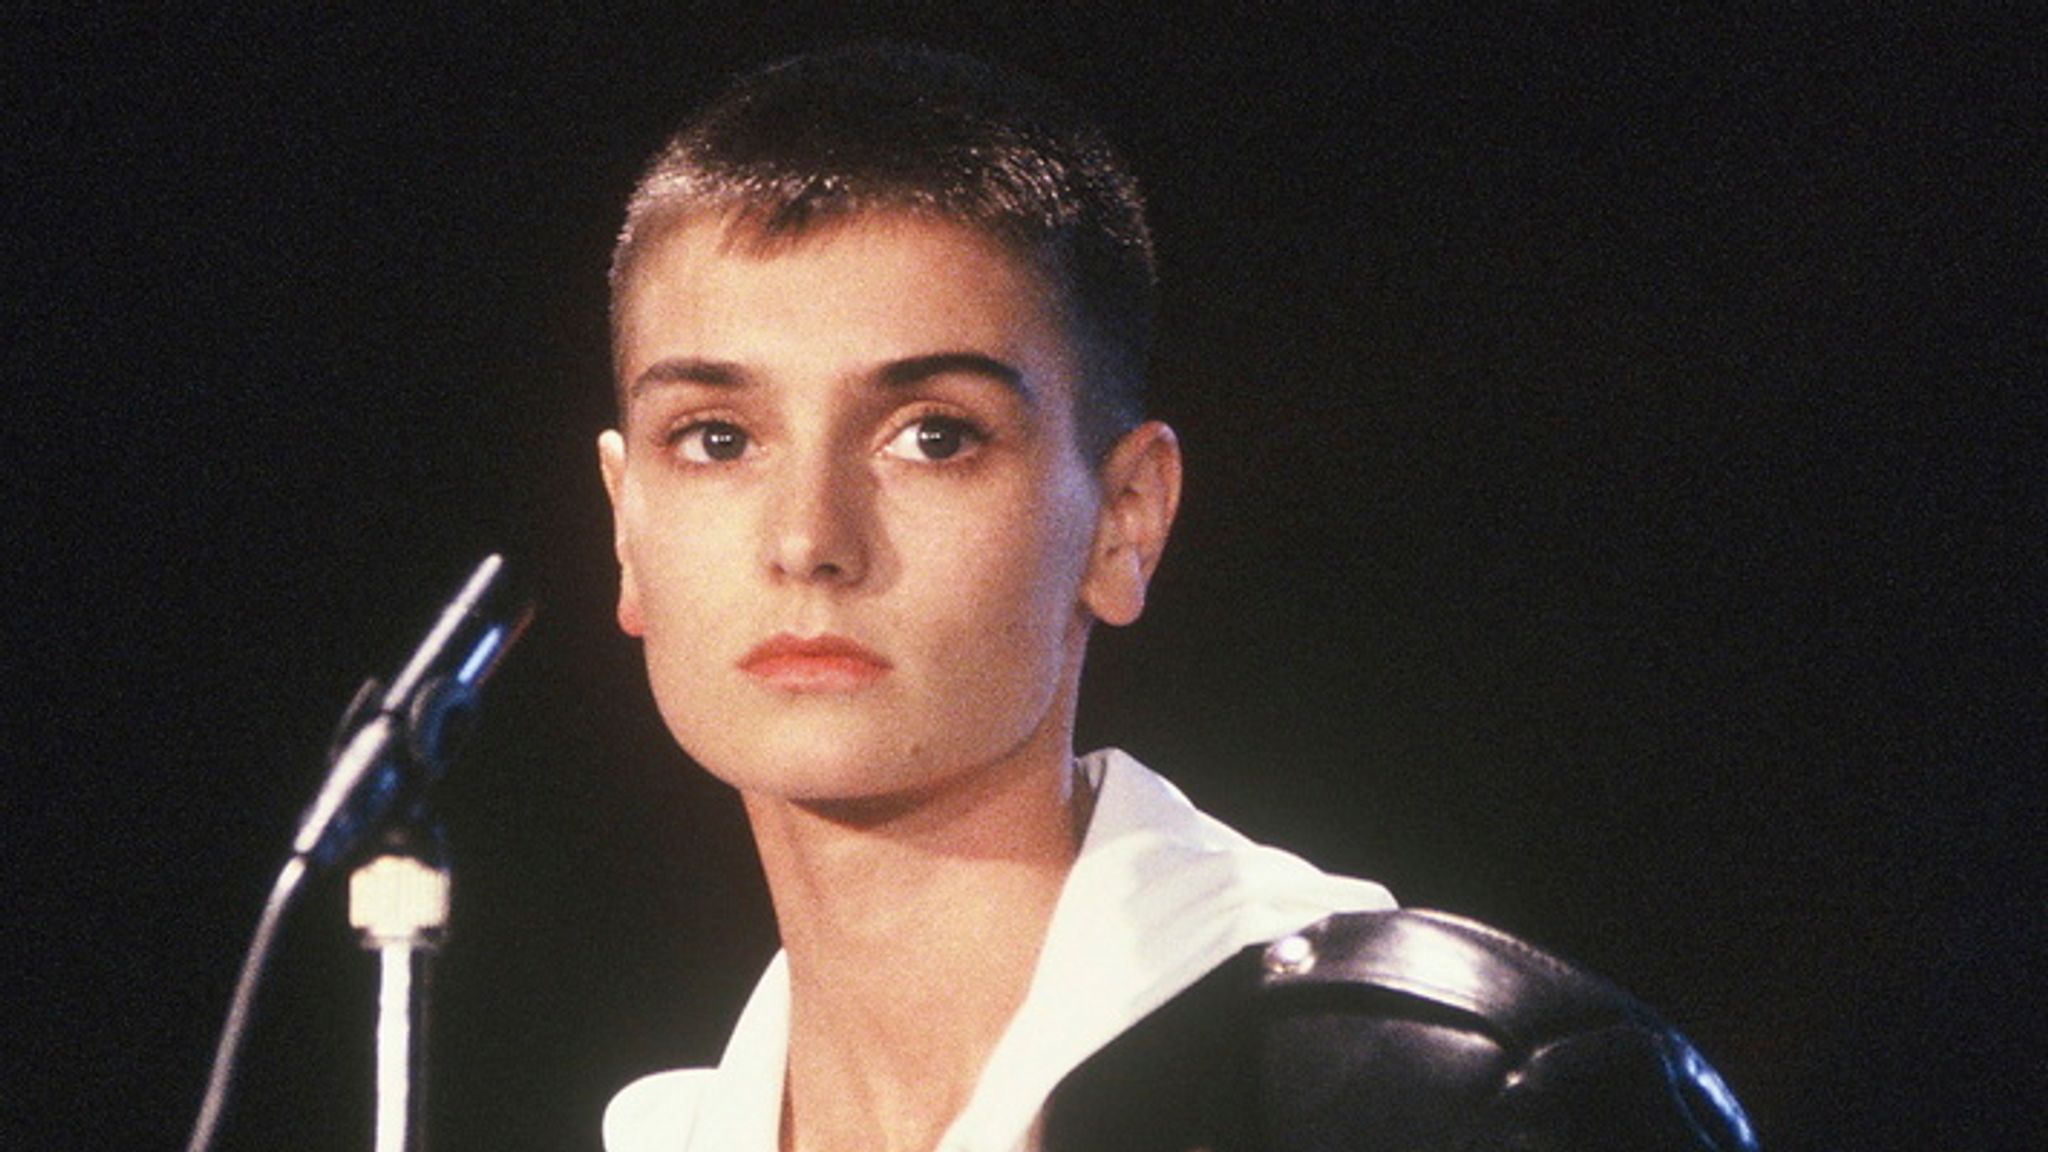 Sinead O'Connor documentary will still air despite singer's death - to  'tell her side of story' | Ents & Arts News | Sky News